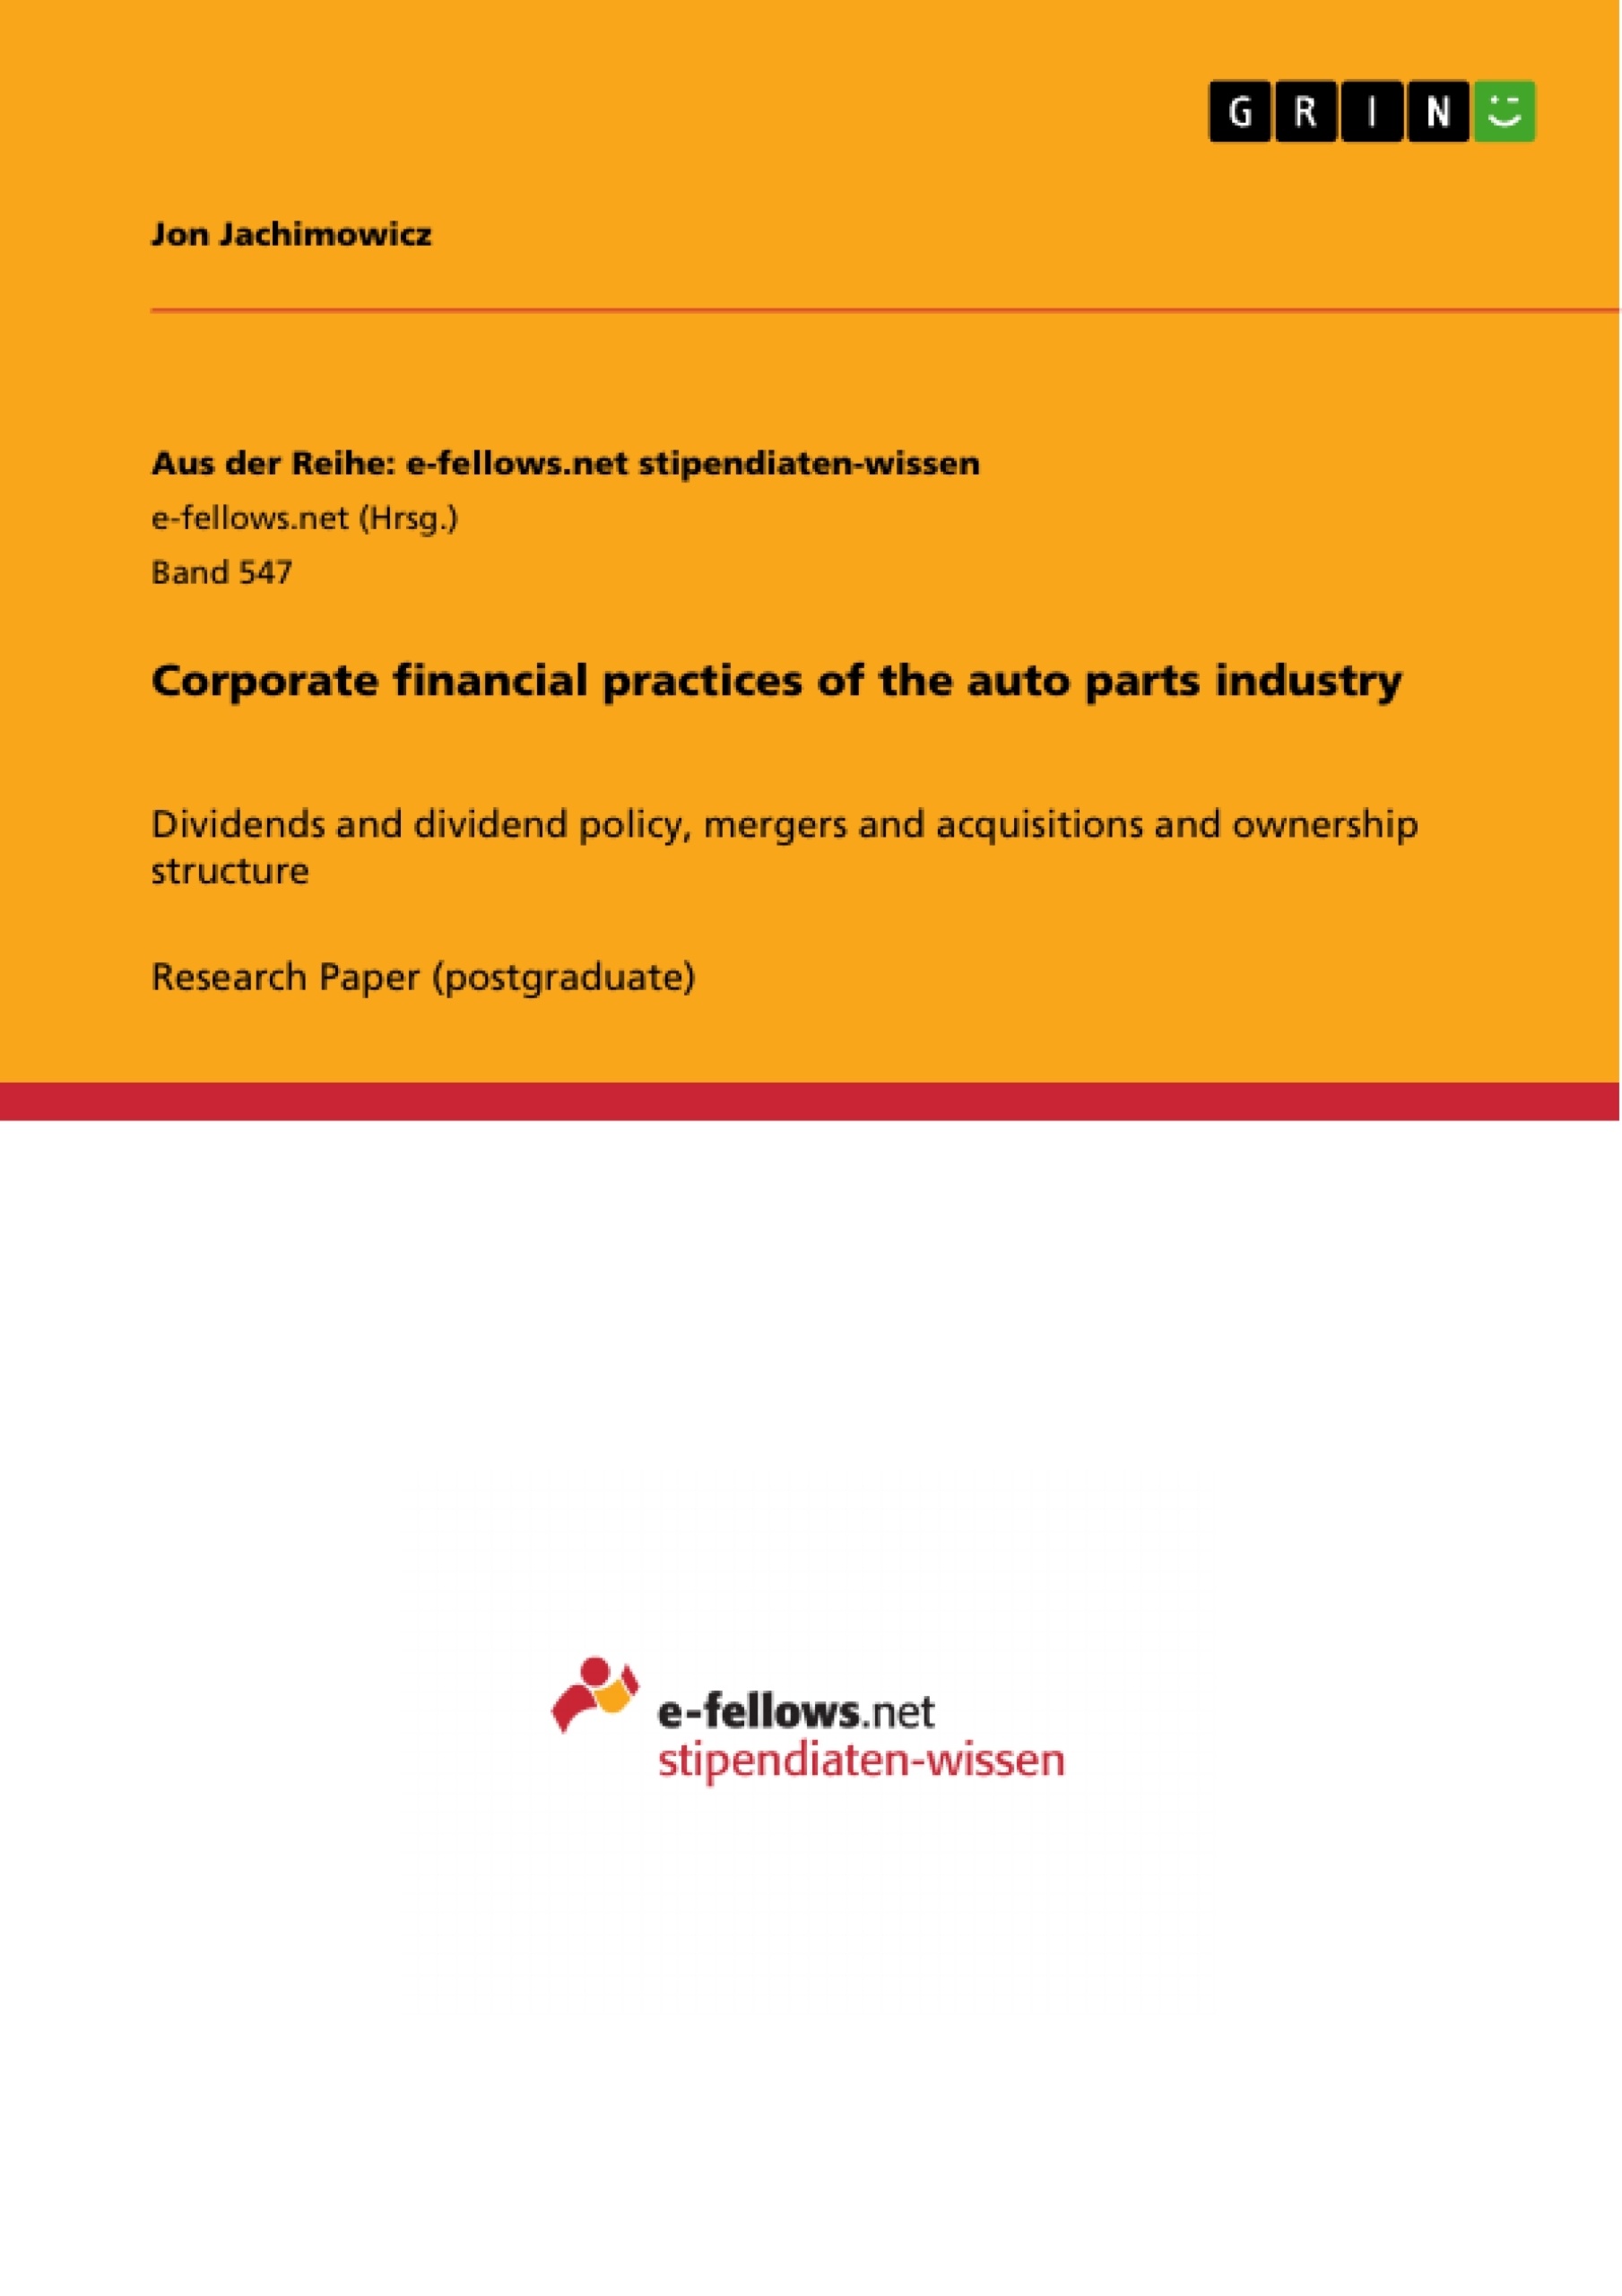 Title: Corporate financial practices of the auto parts industry